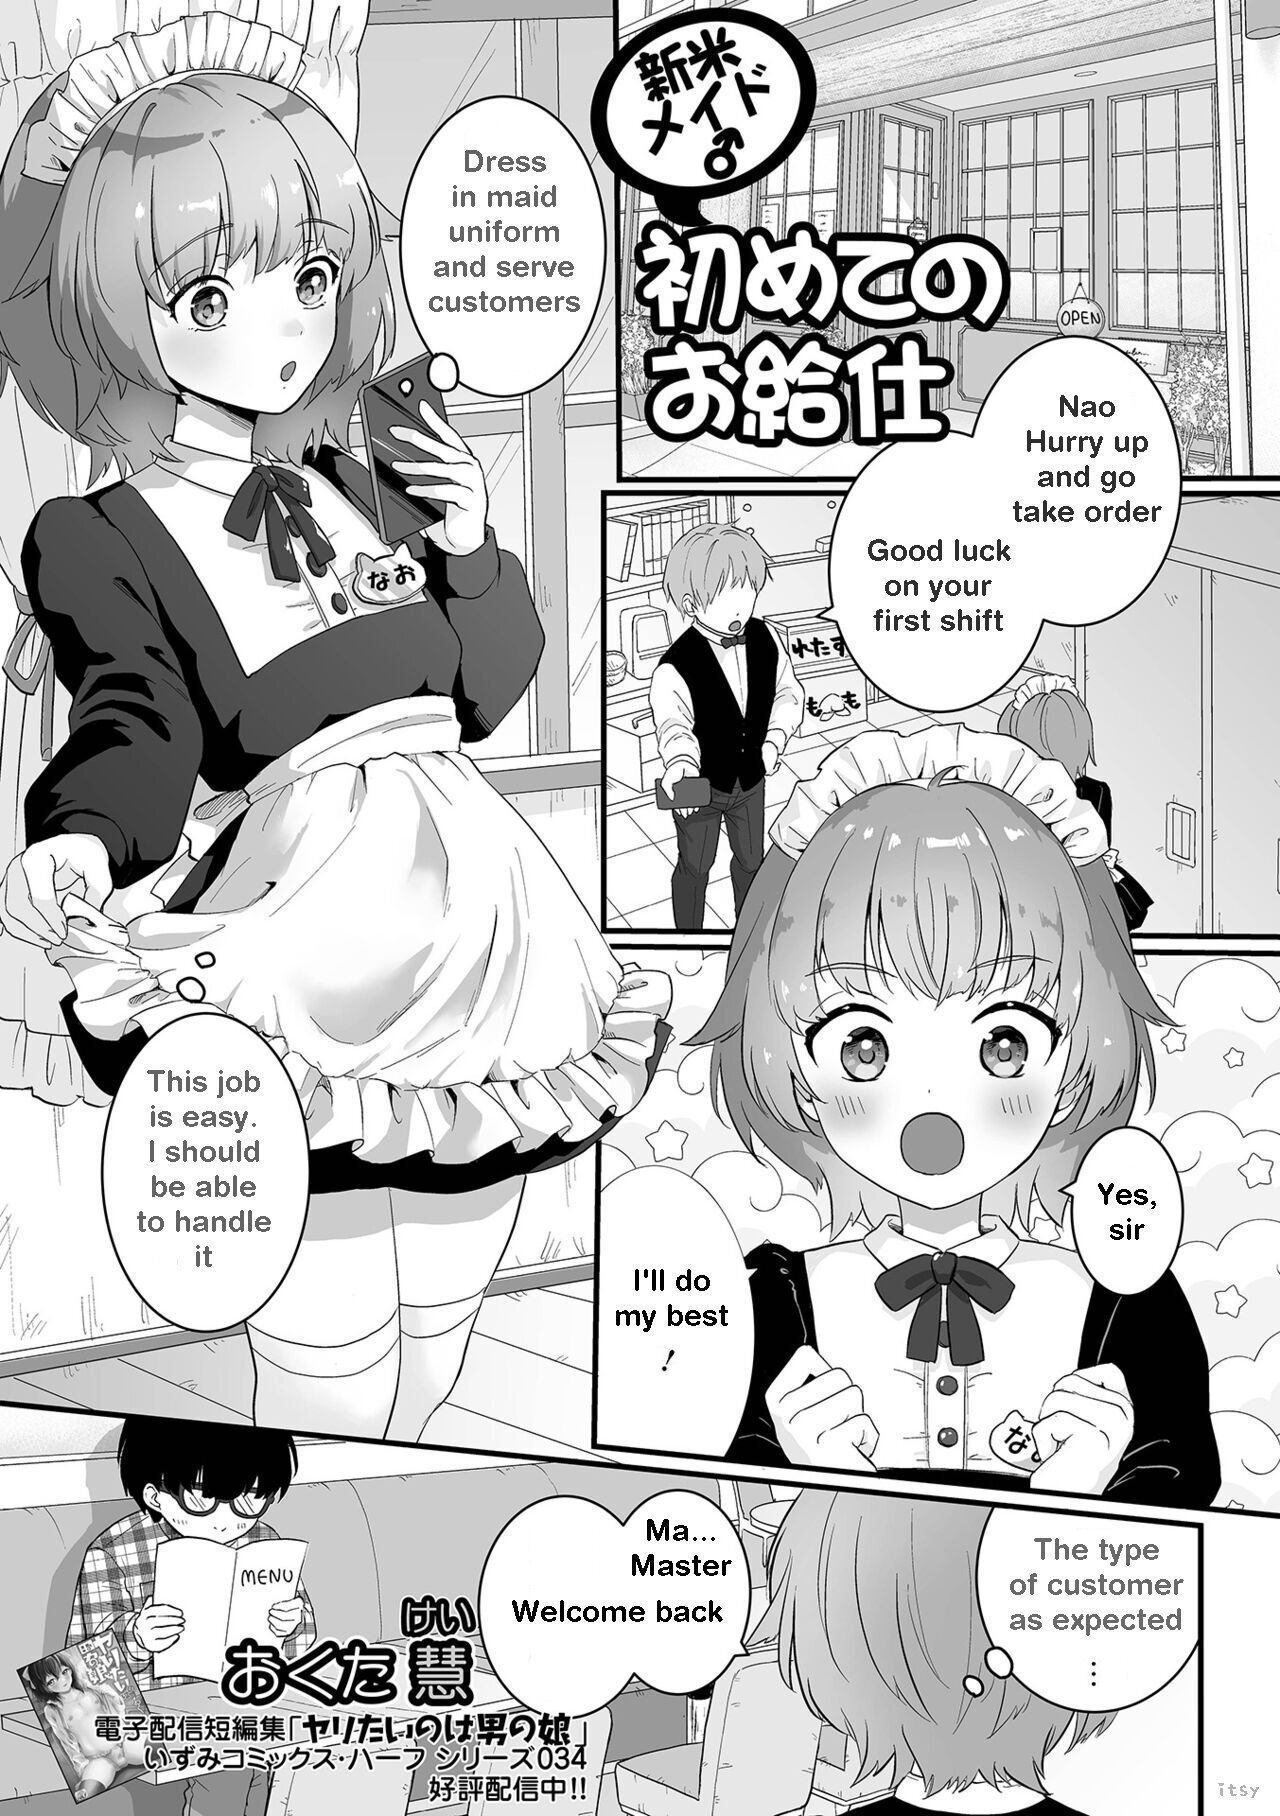 African Maid Porn Comic - Maid - sorted by number of objects - Free Hentai